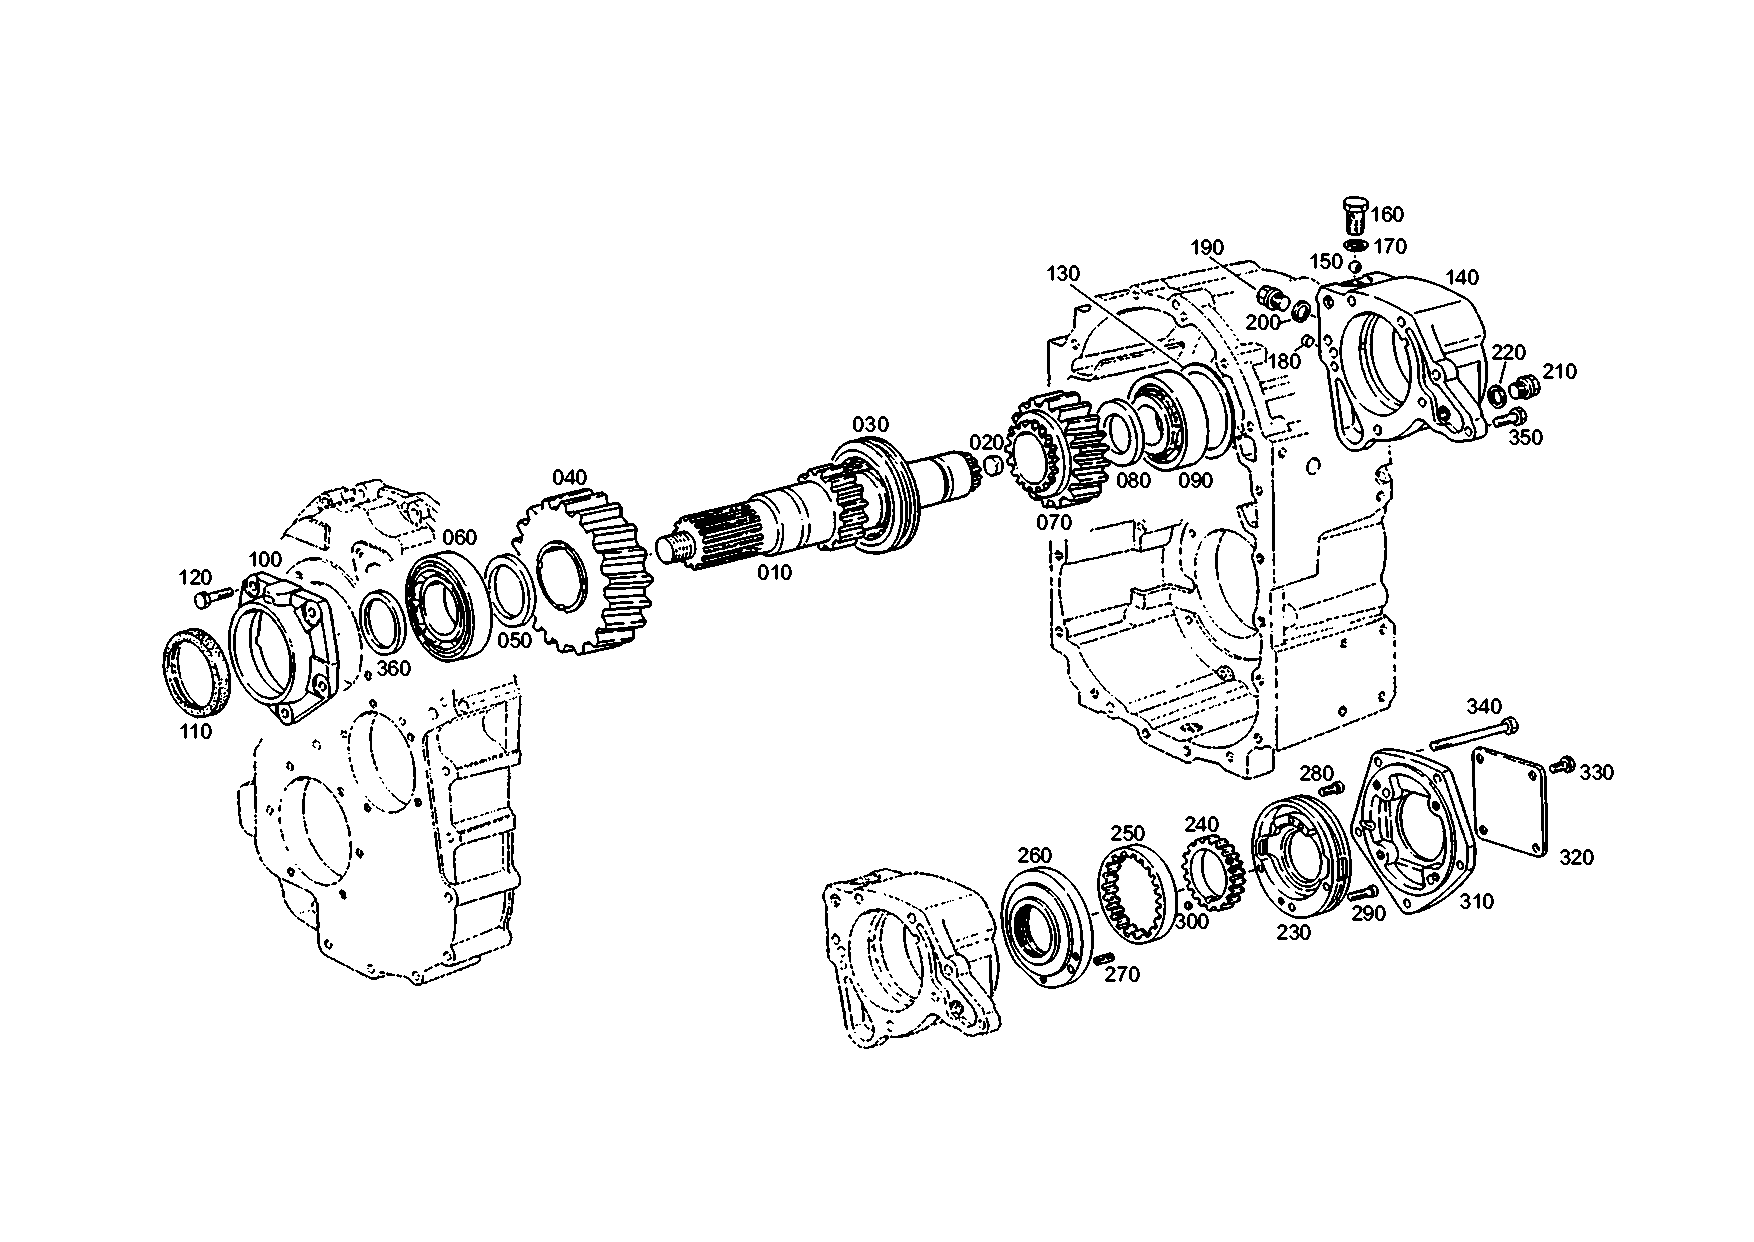 drawing for MARMON Herring MVG121061 - INPUT GEAR (figure 2)